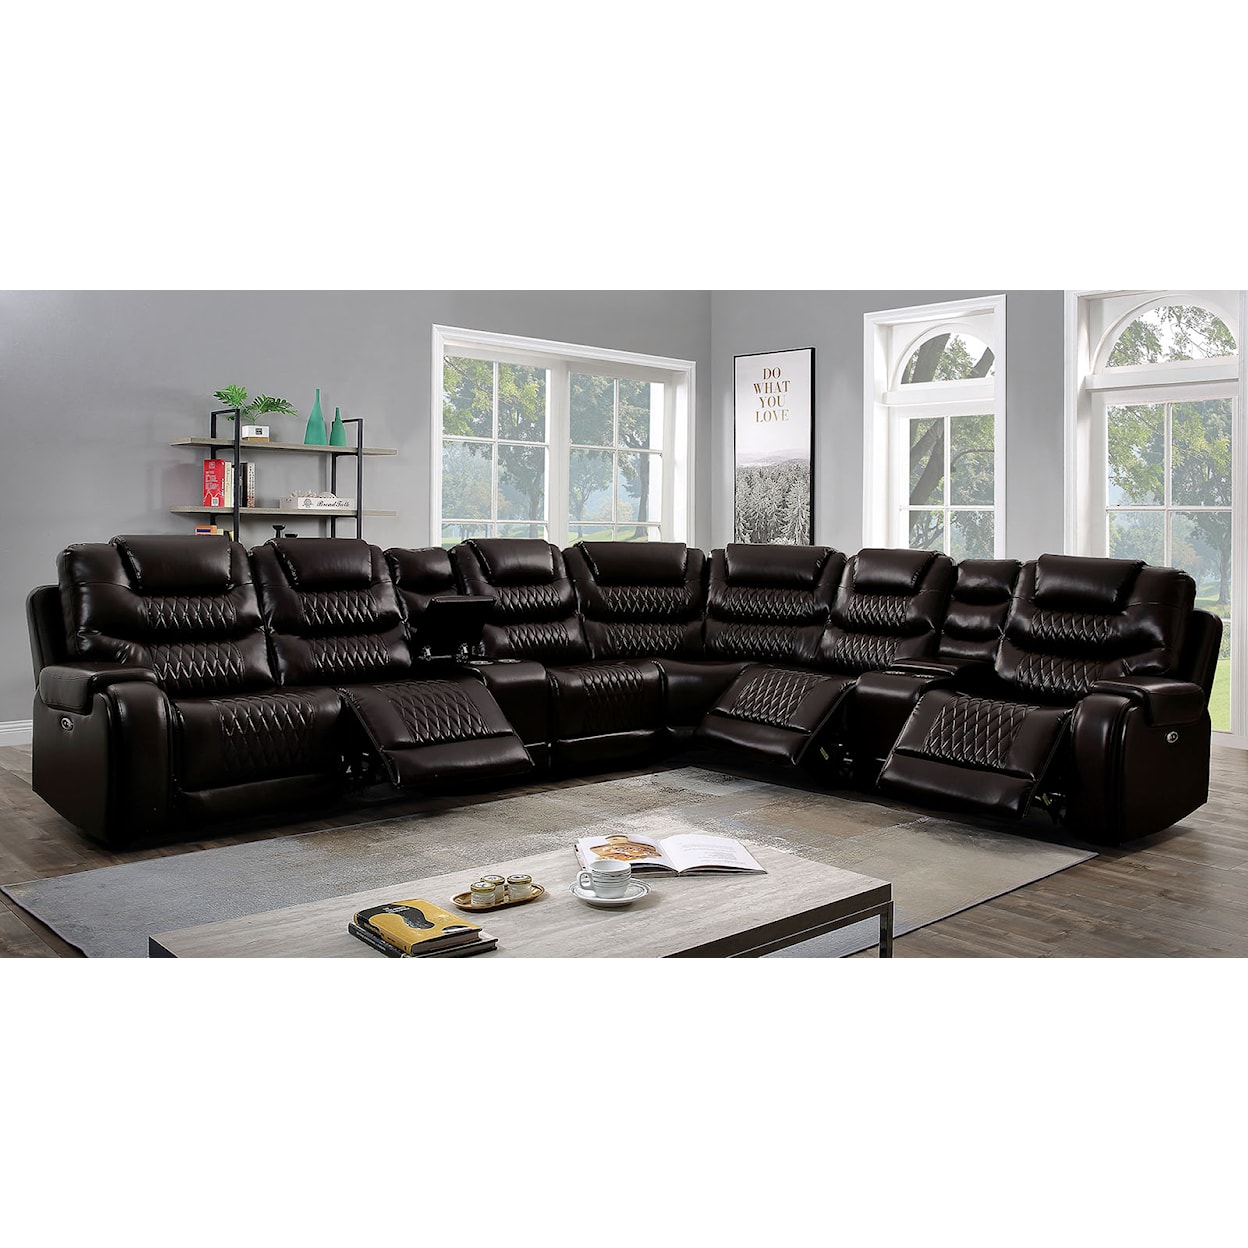 Furniture of America Mariah Upholstery Power Sectional + Power Recliner